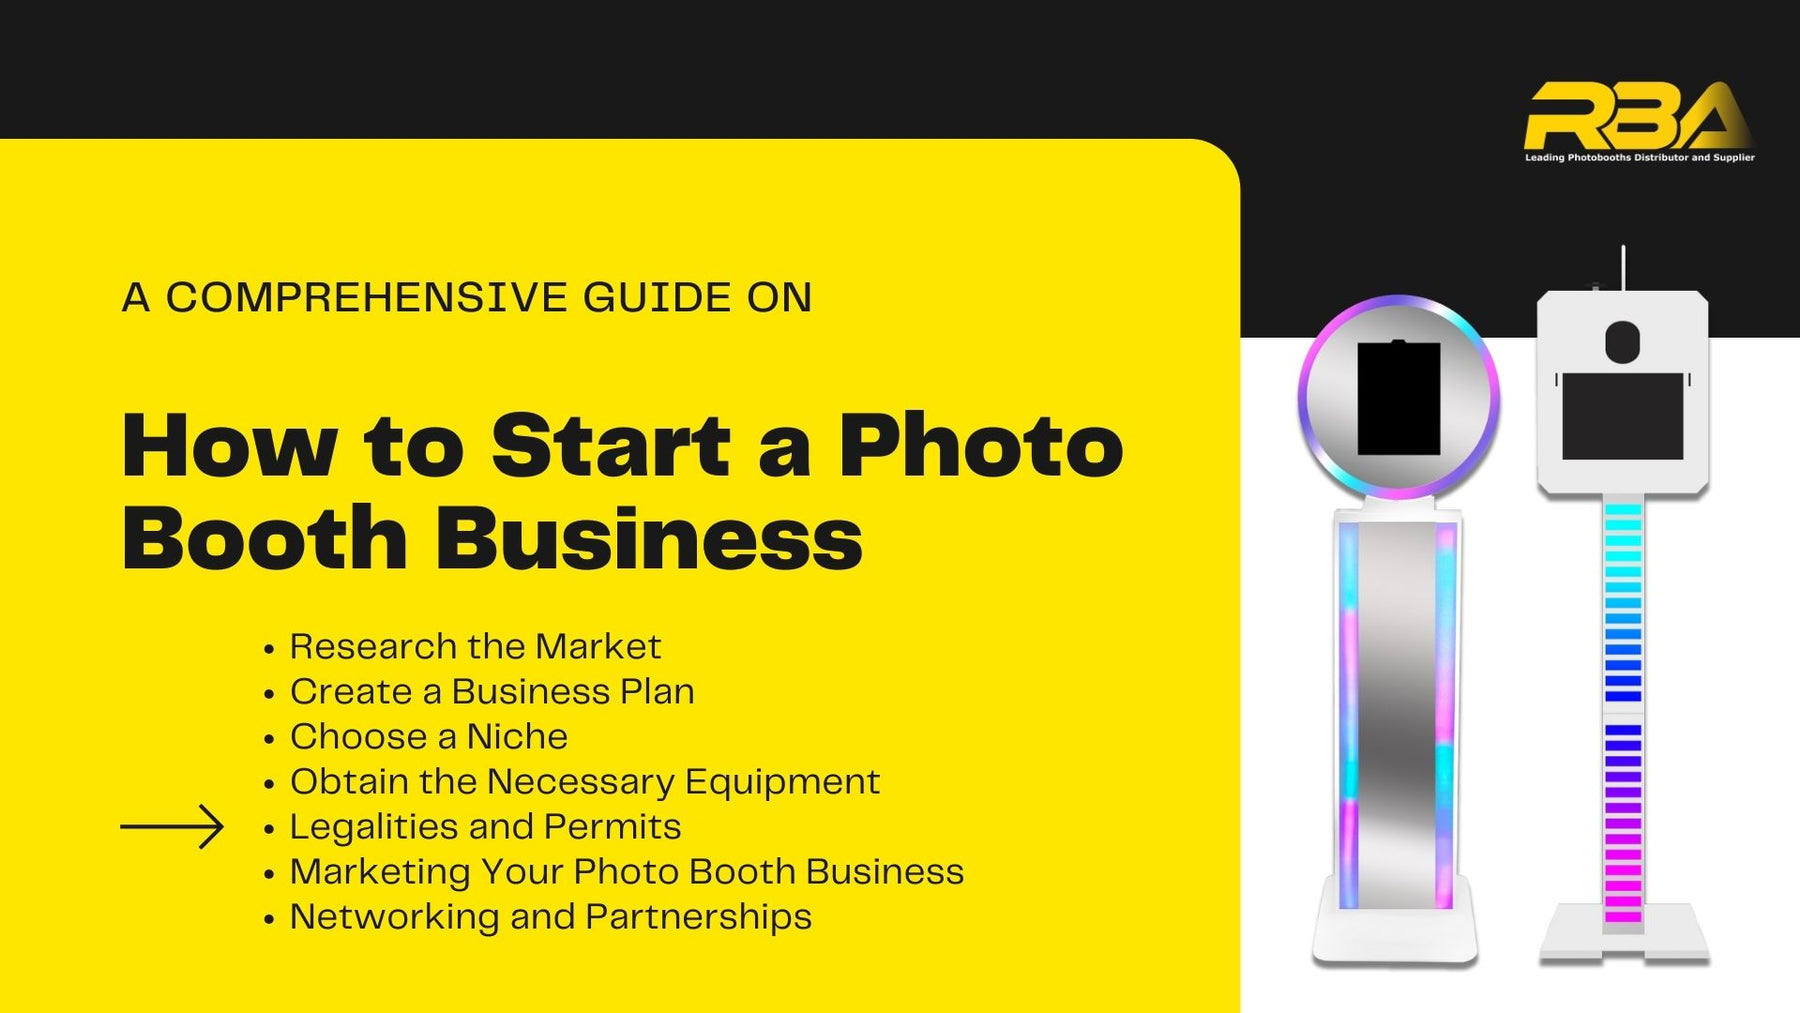 A Comprehensive Guide on How to Start a Photo Booth Business